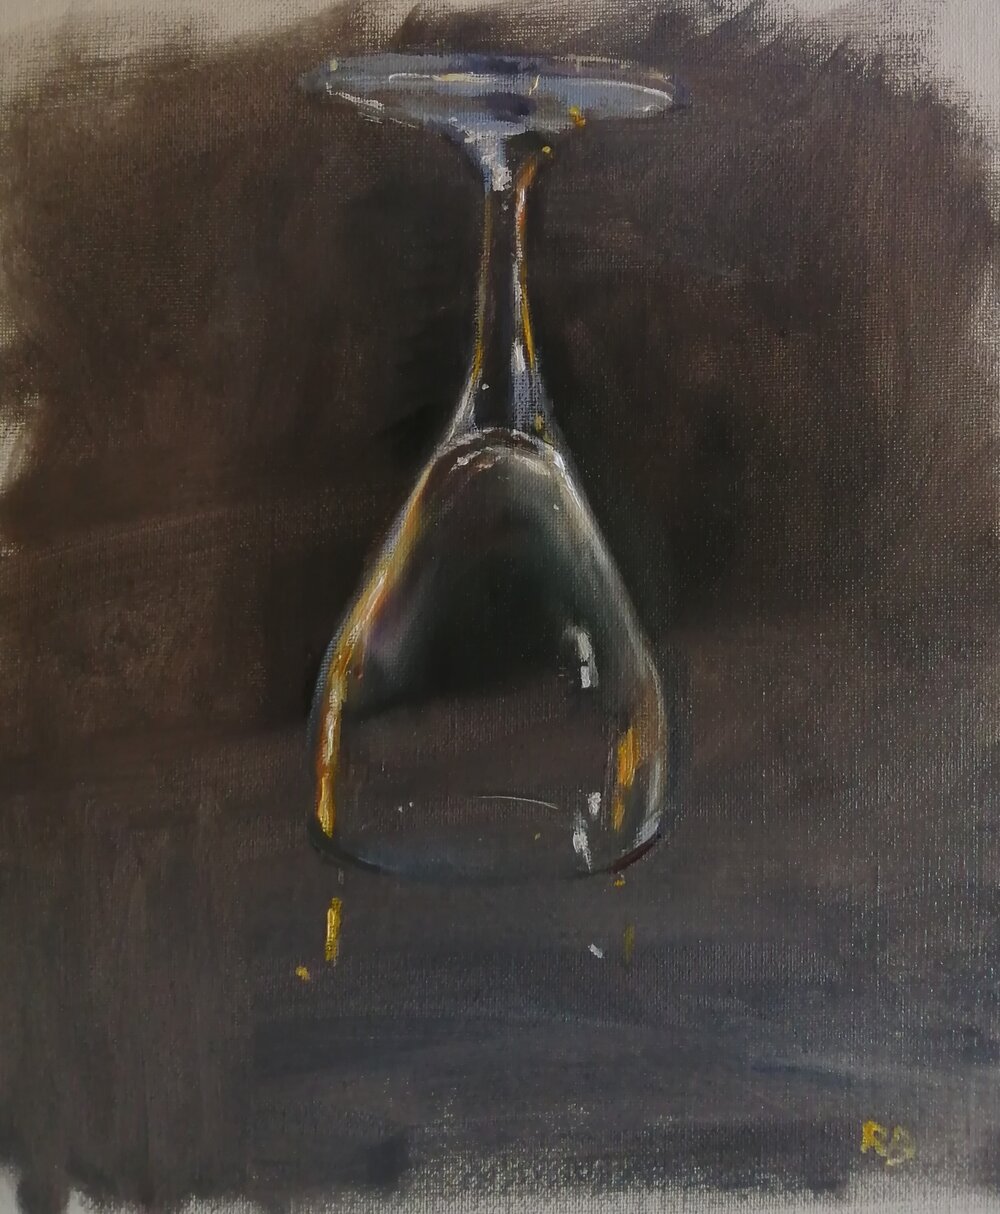  Dry wine glass  Oil on board  26x31 cm  SOLD  A still life painting of a drained wine glass, painted in a crisp, realist style. There is a delicacy and subtlety to this piece, with the different reflections on the glass and the reflective surface it